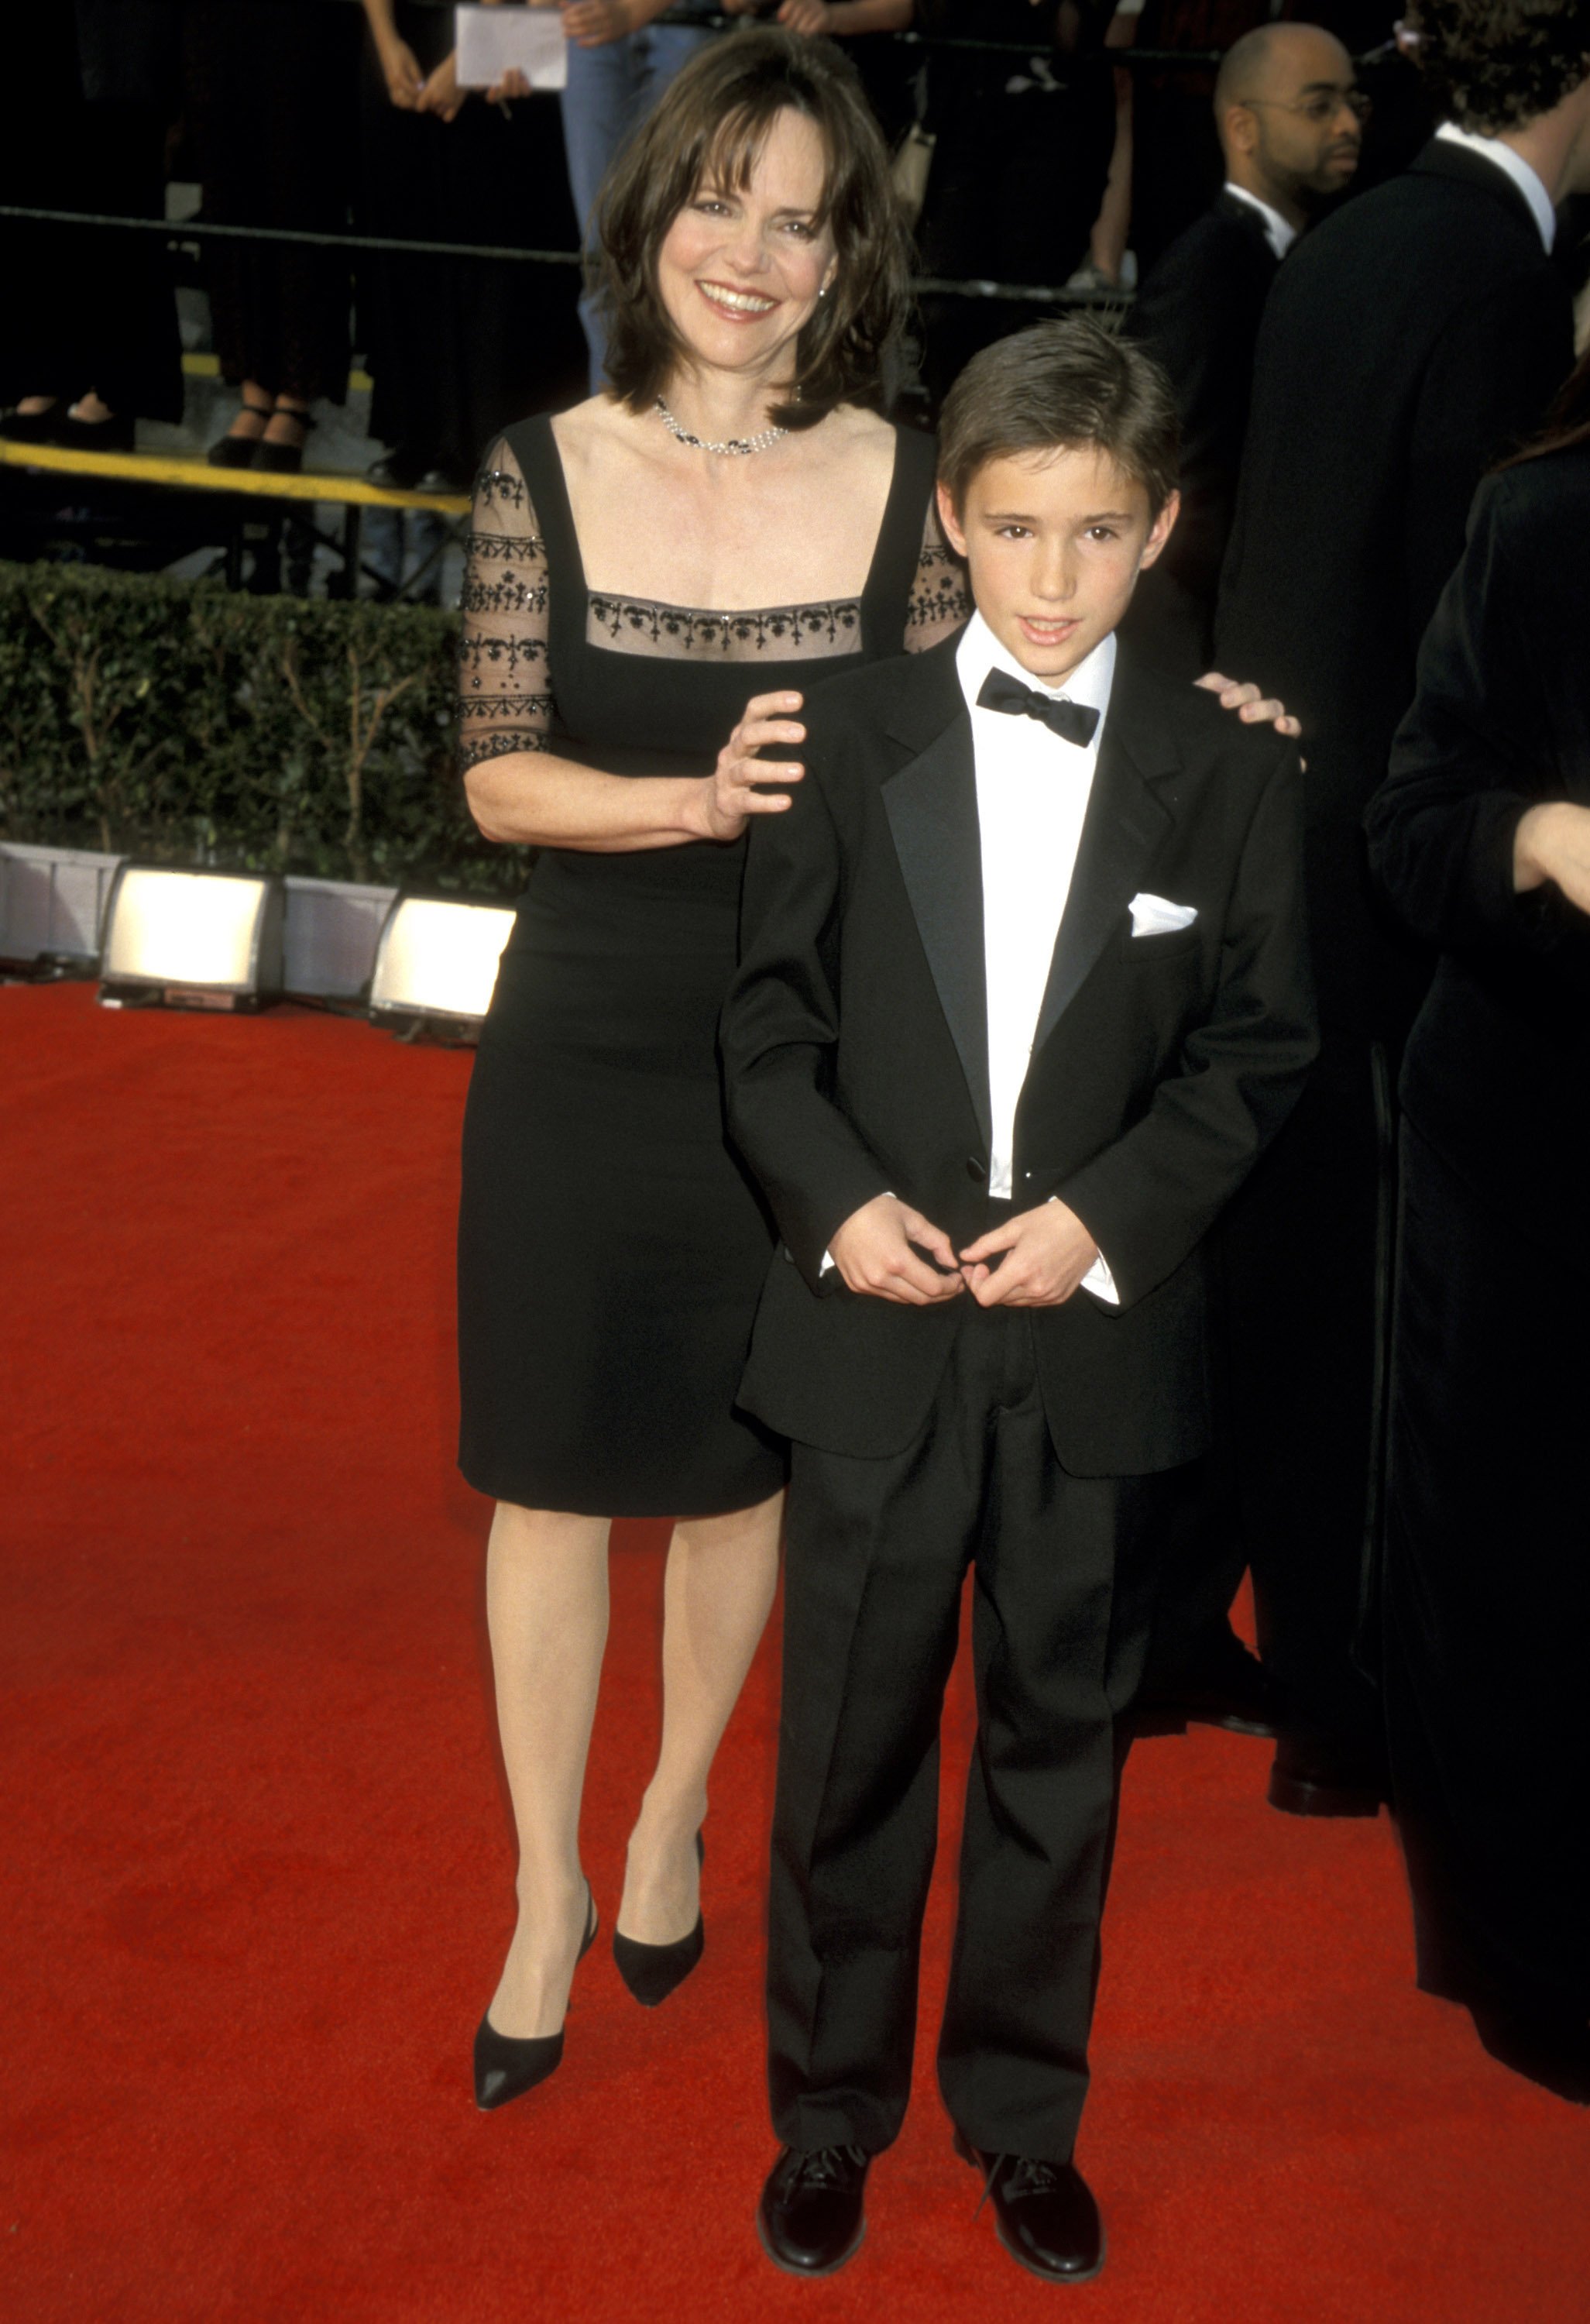 Sally Field and her son Samuel Greisman during the 6th Annual Screen Actors Guild Awards in Los Angeles, California, on March 12, 2000 | Source: Getty Images